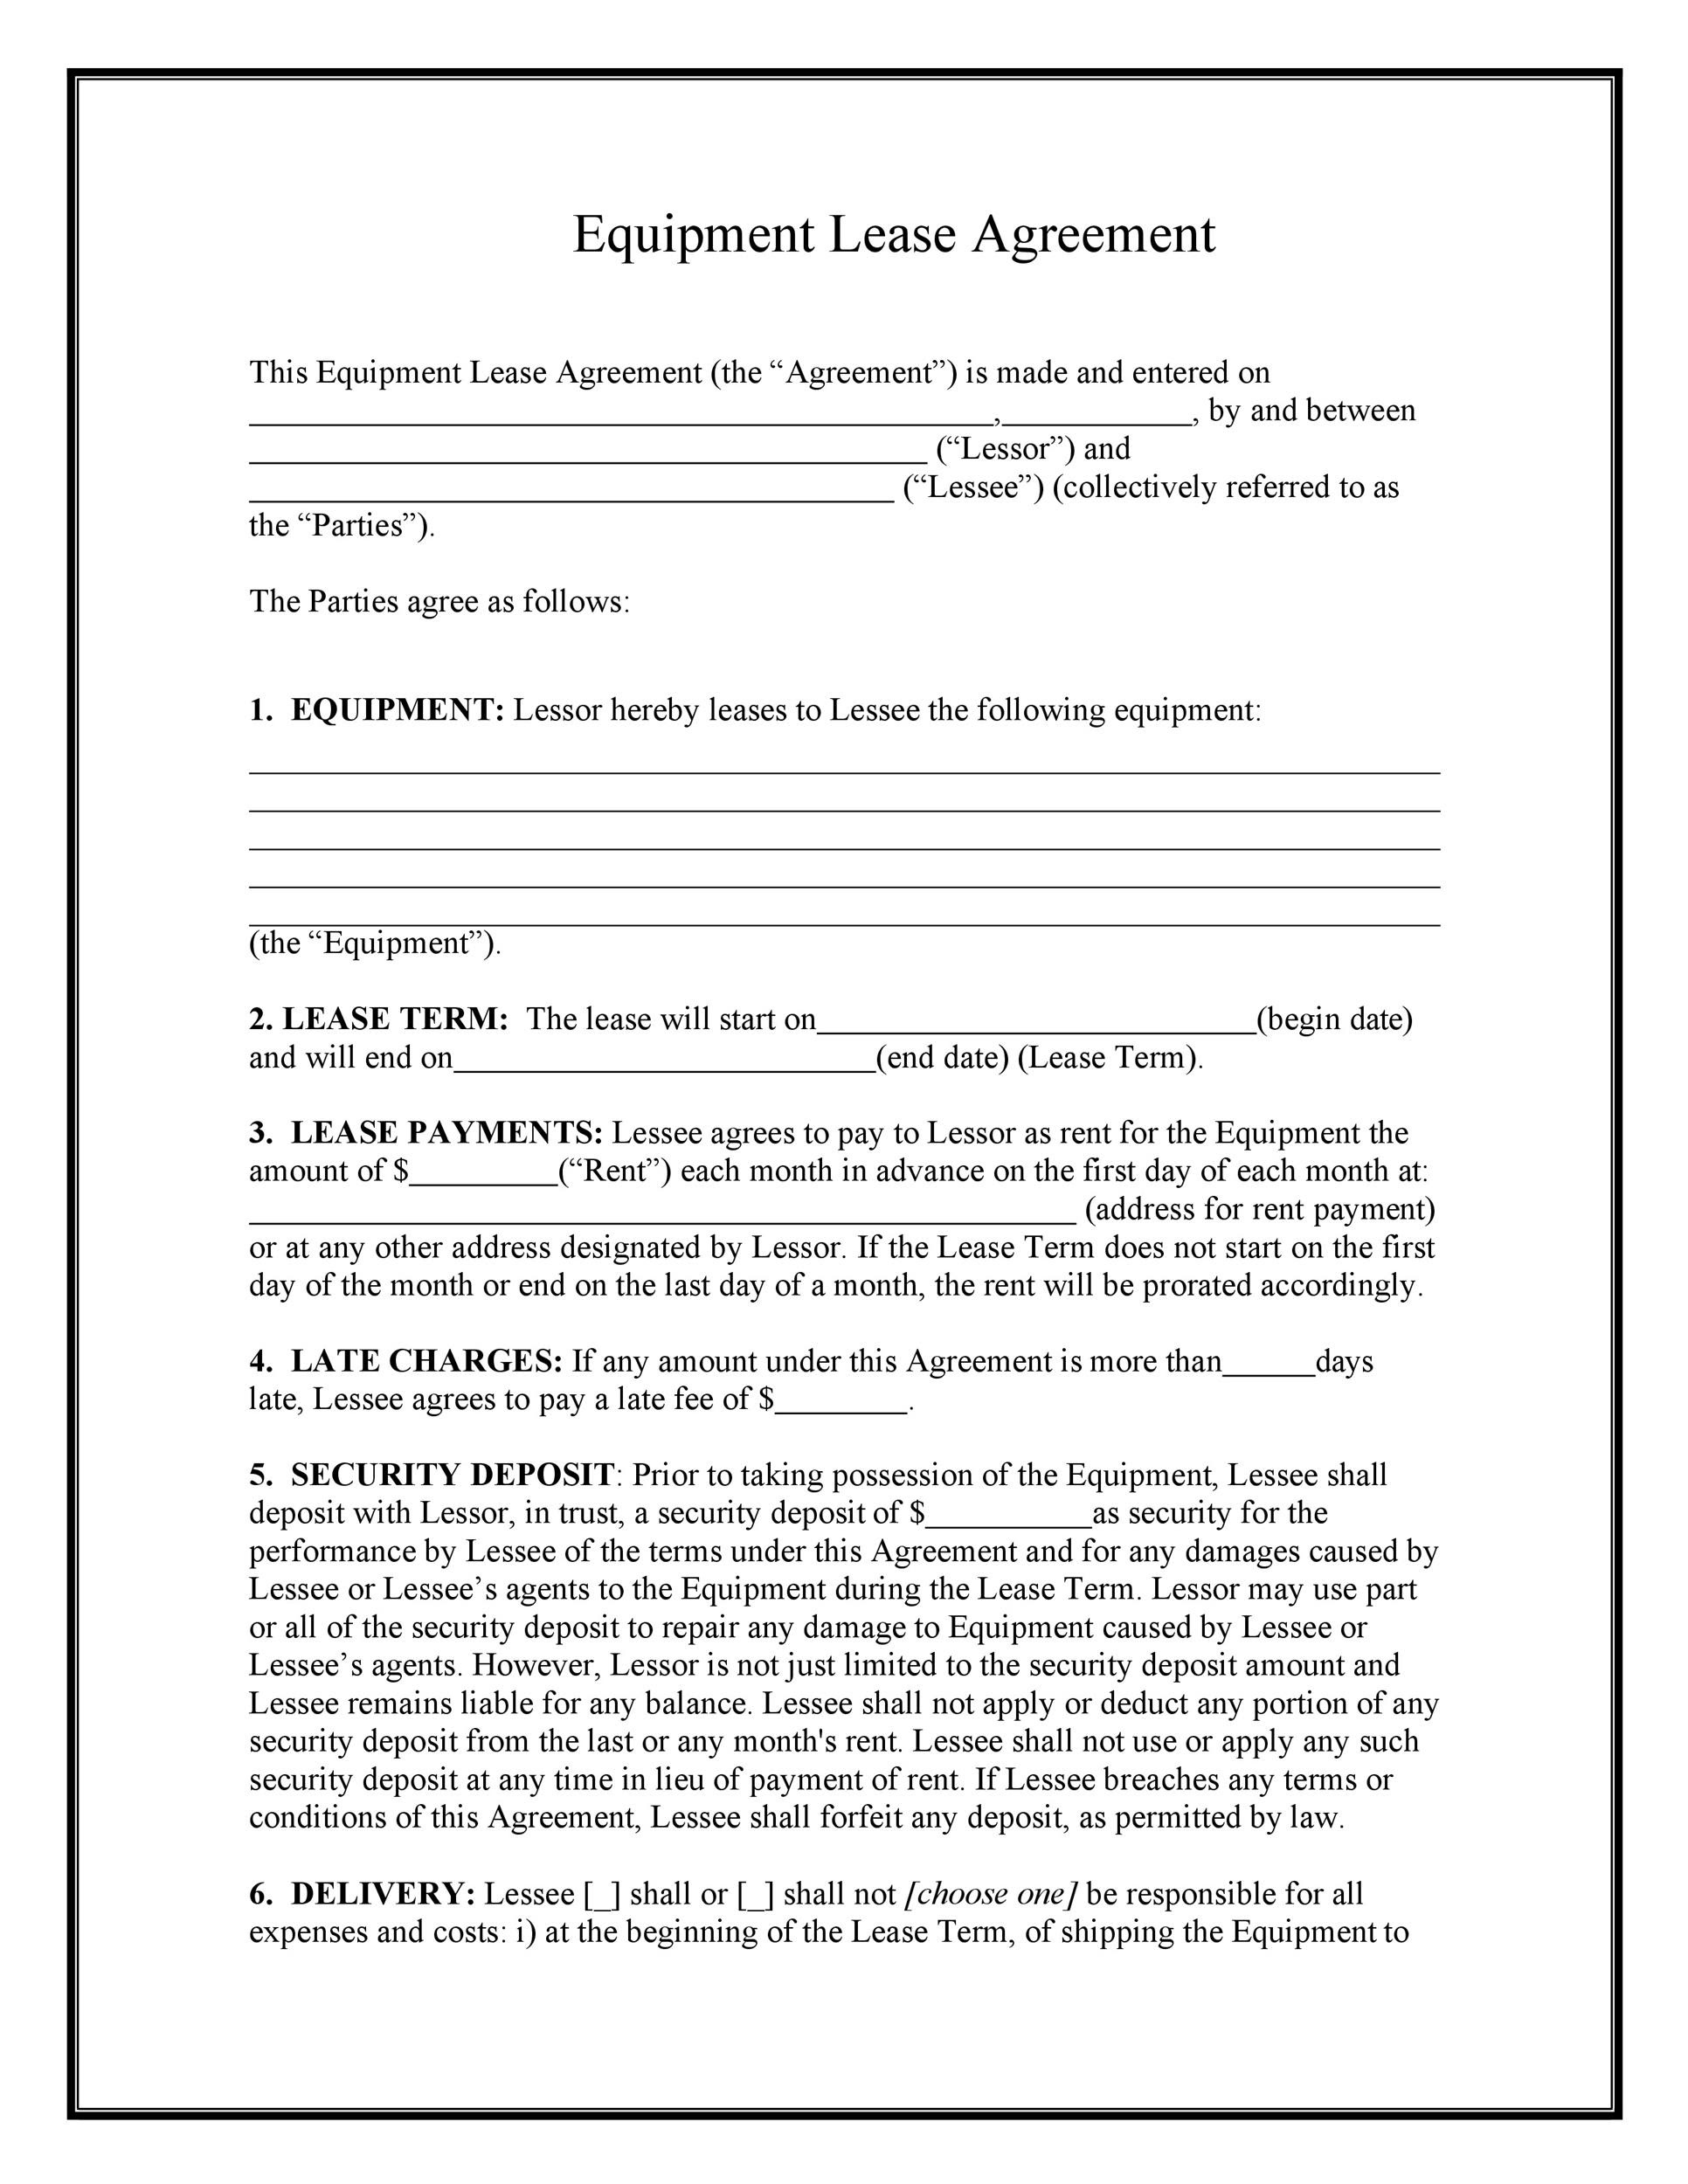 tenancy-agreement-template-free-download-malaysia-hq-printable-documents